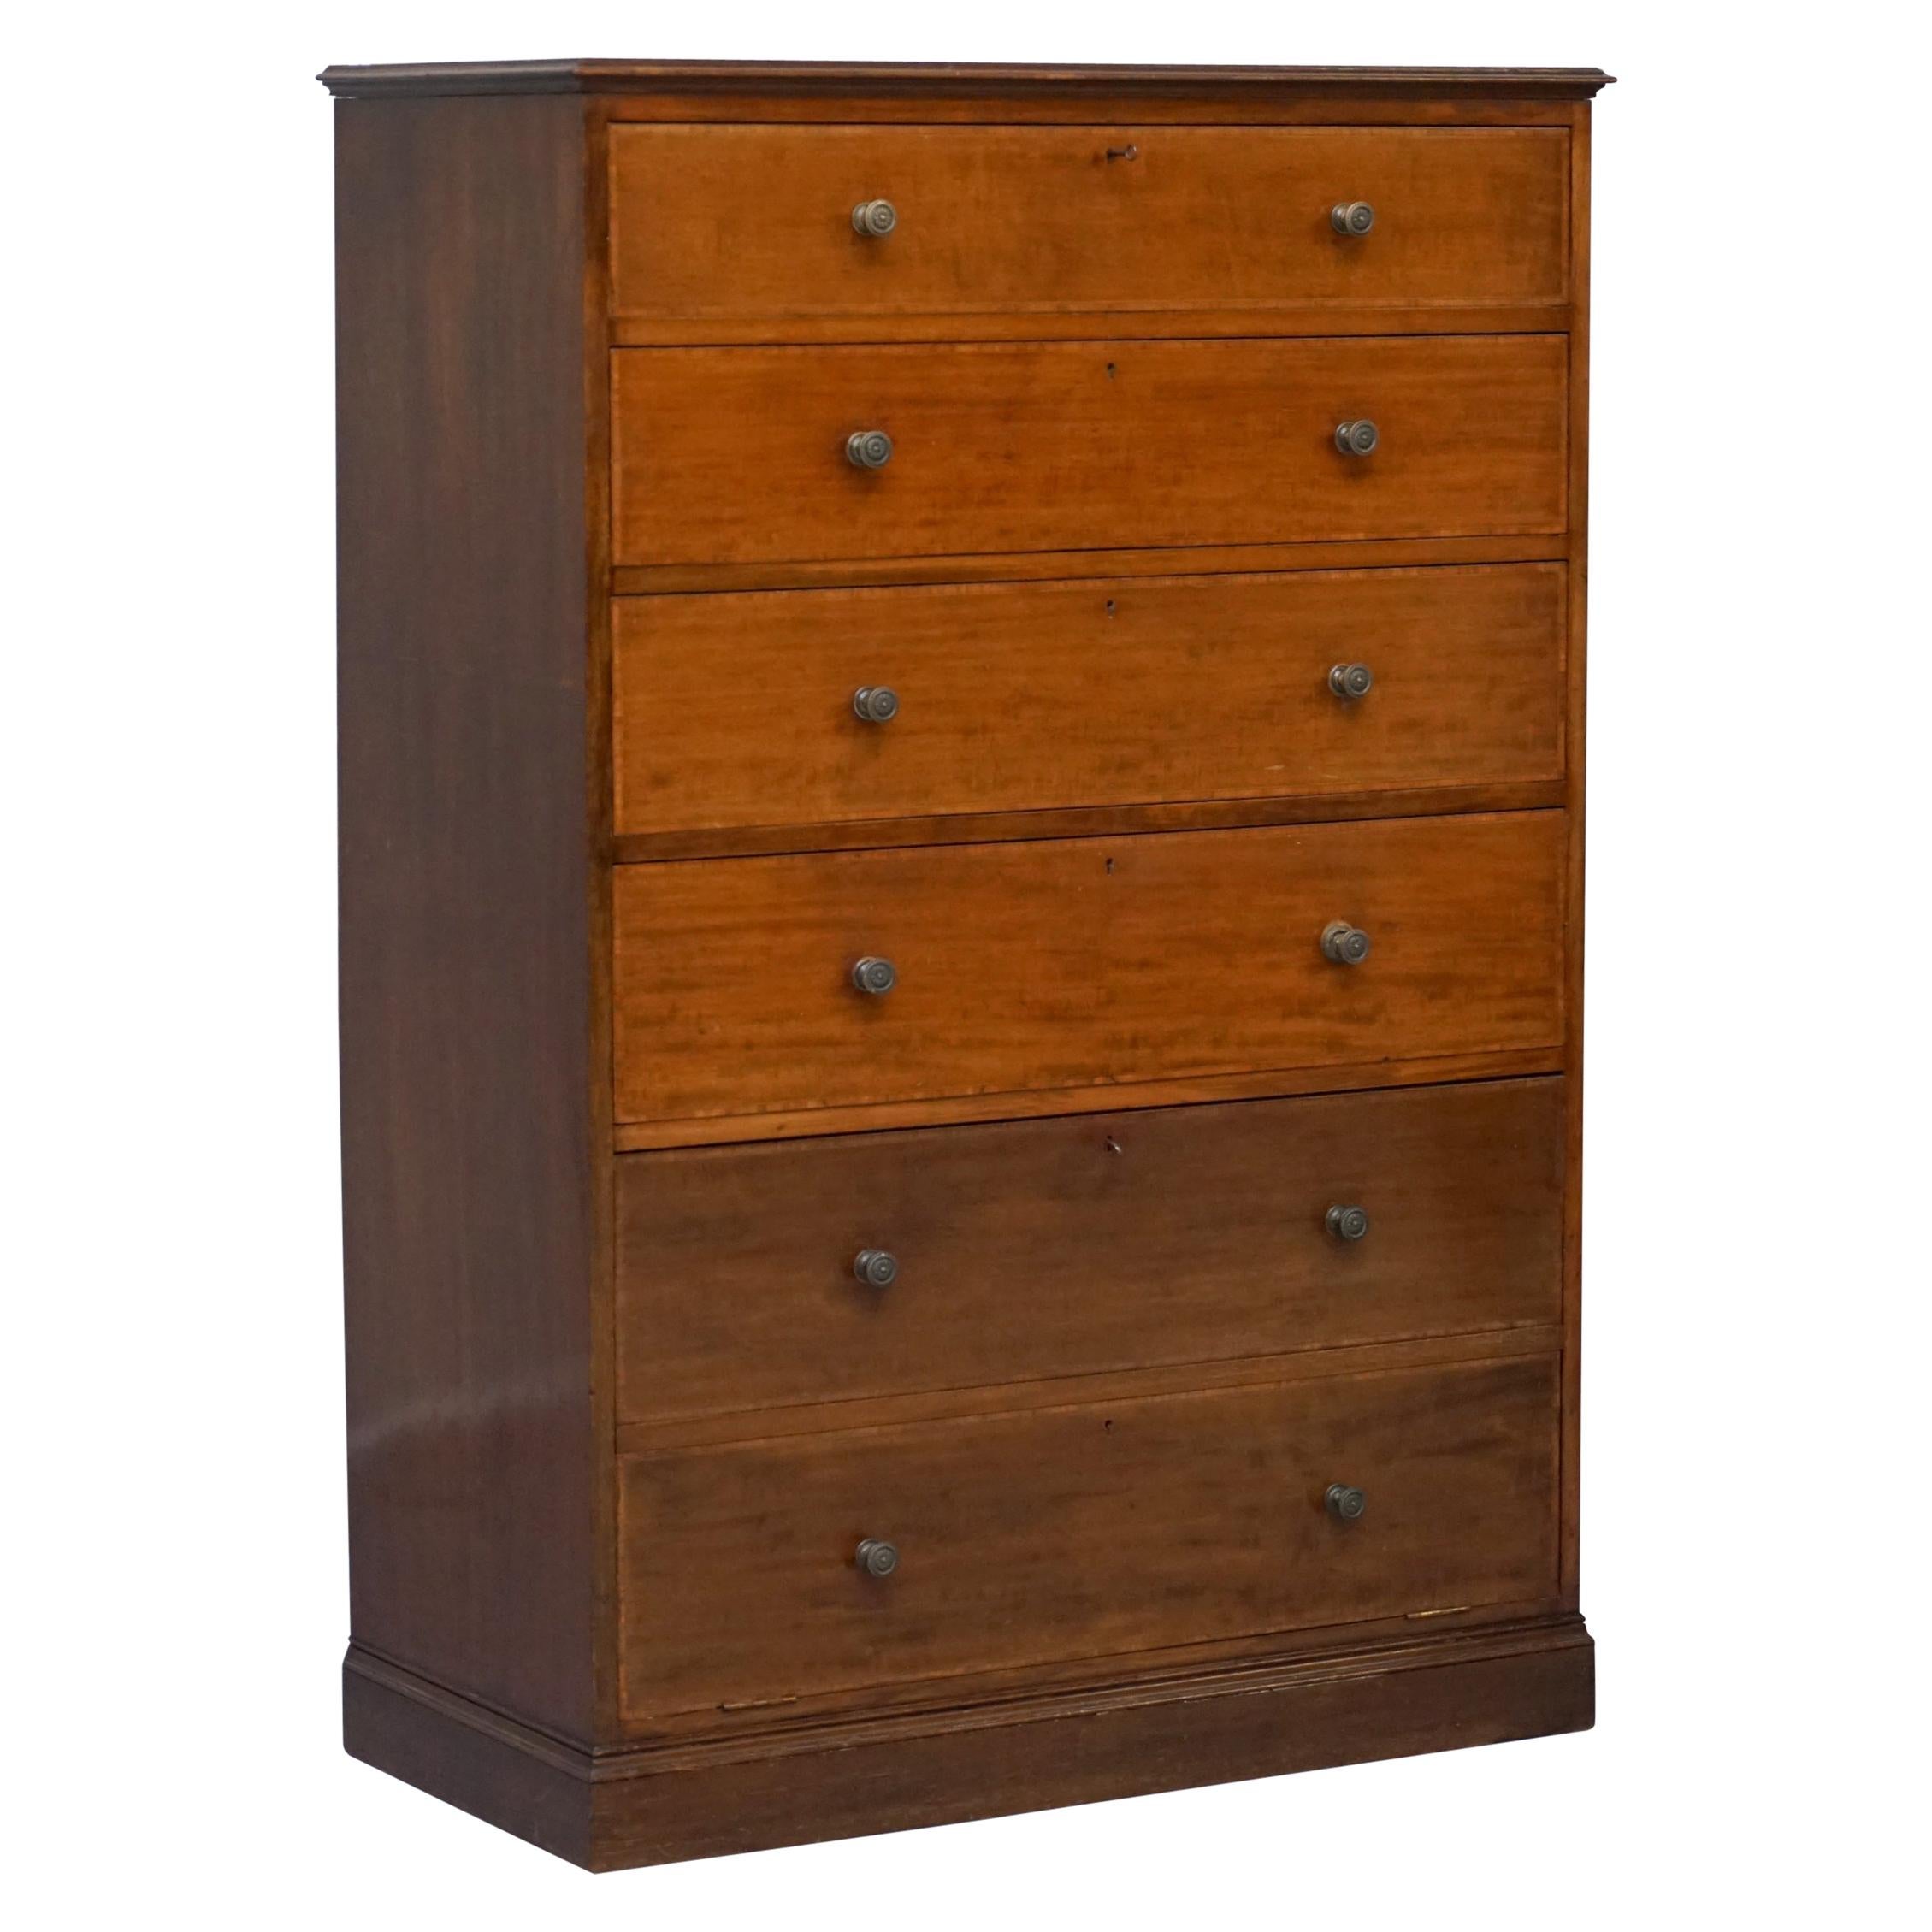 Very Rare Howard & Son's Victorian Chest of Drawers Hidden Silver Wear Cupboard For Sale